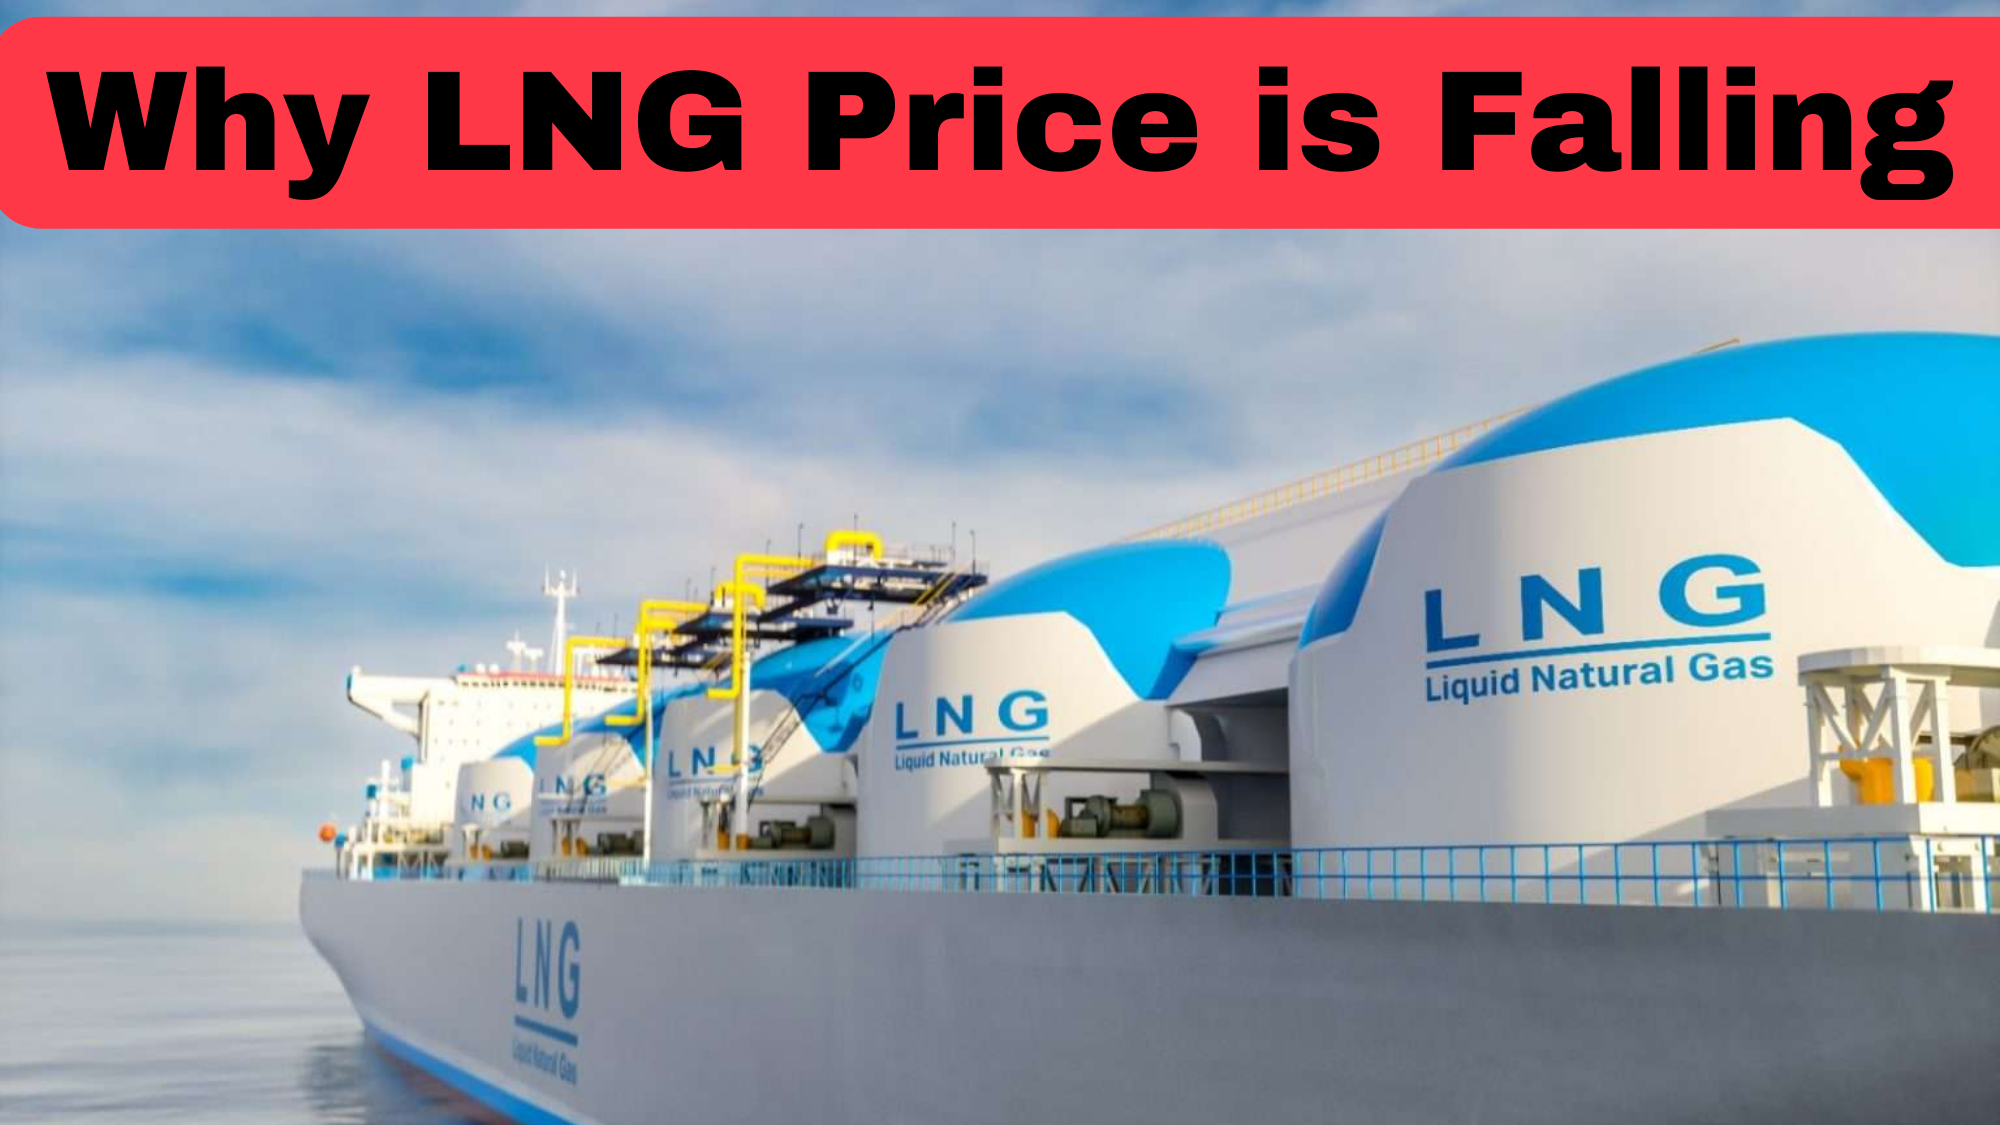 Why is LNG Price Falling and Demand Surging?